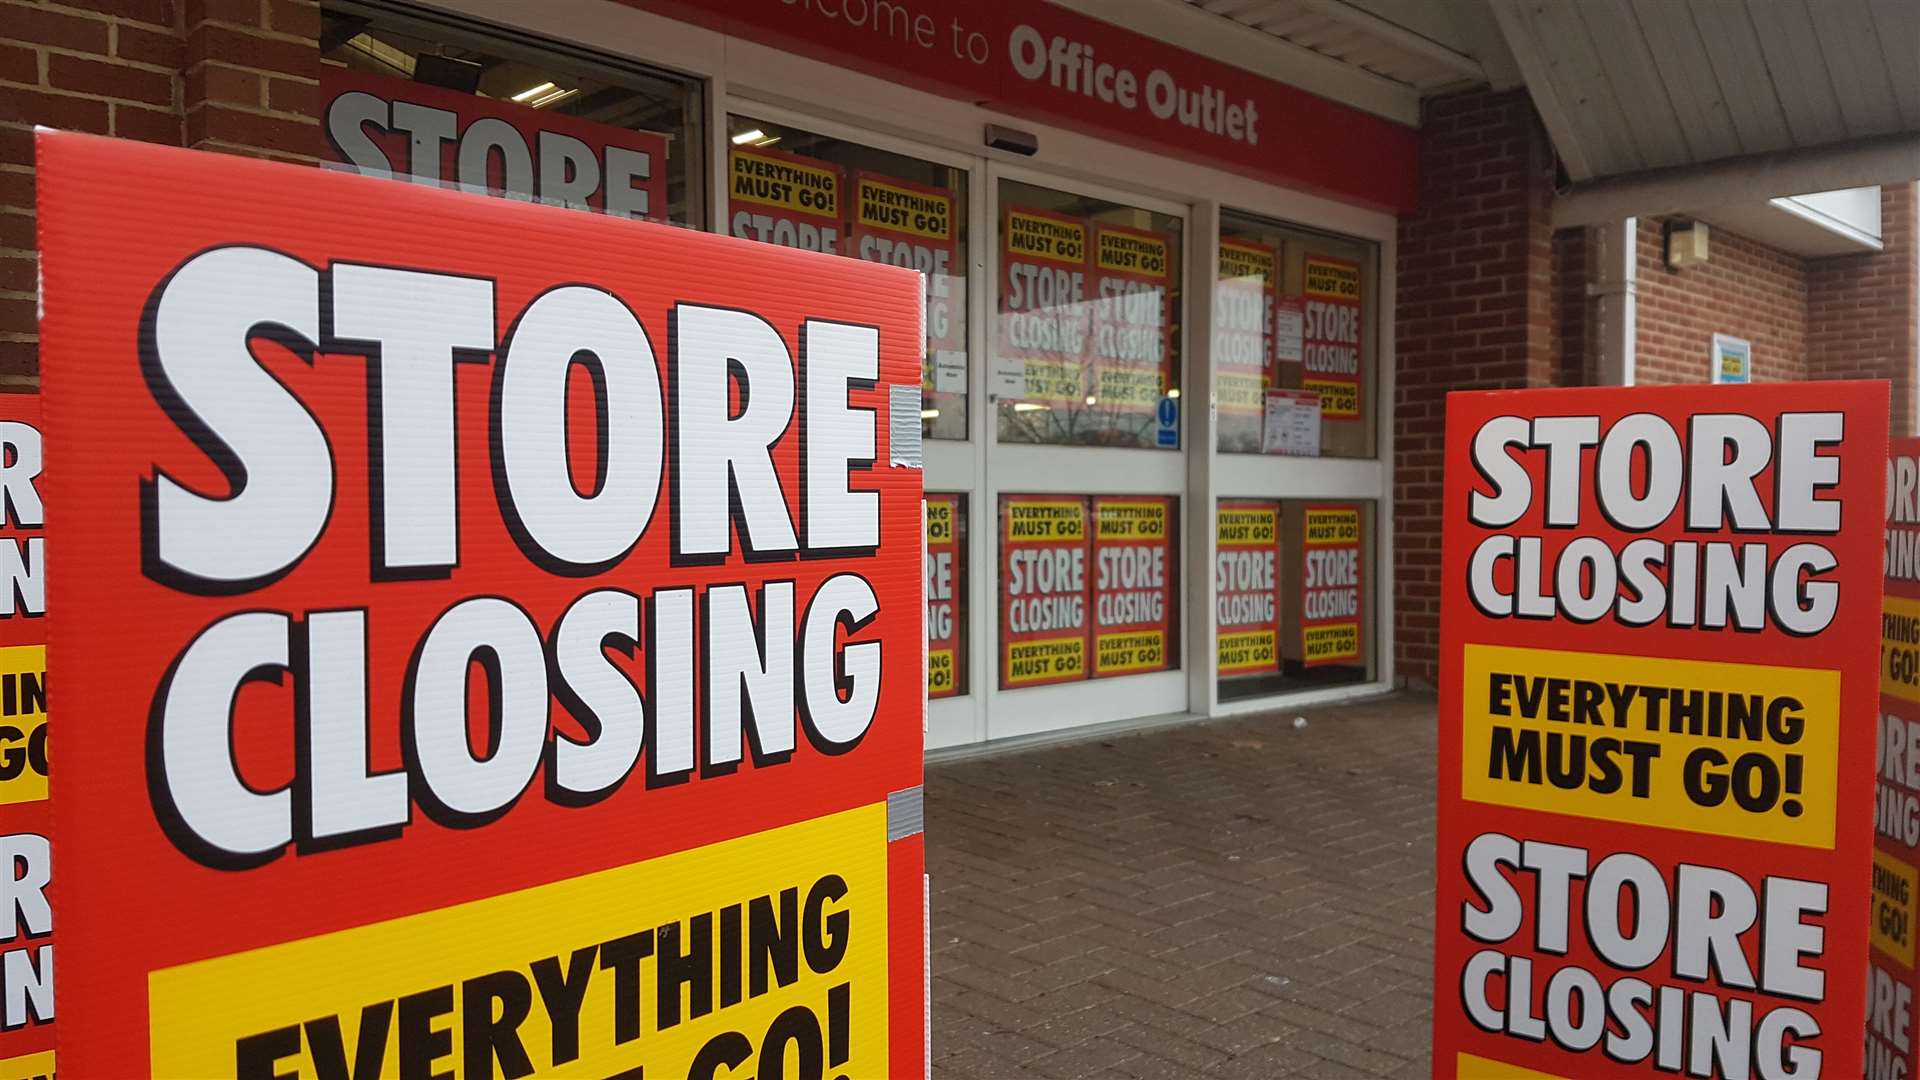 Office Outlet is closing - sparking price reductions